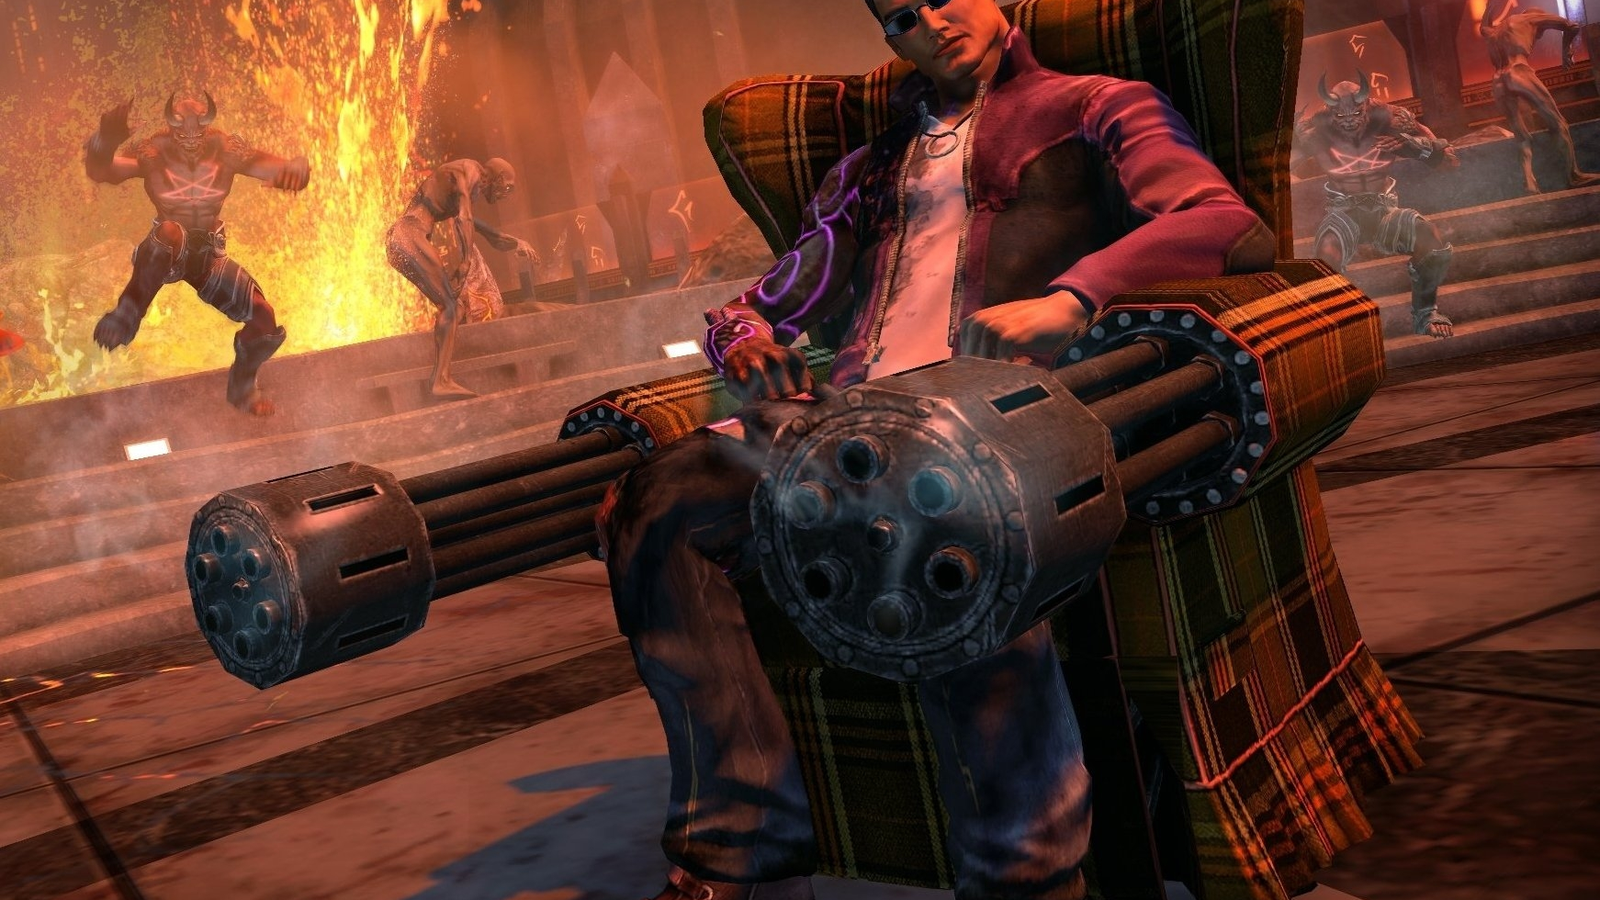 Saints Row: Gat Out of Hell review